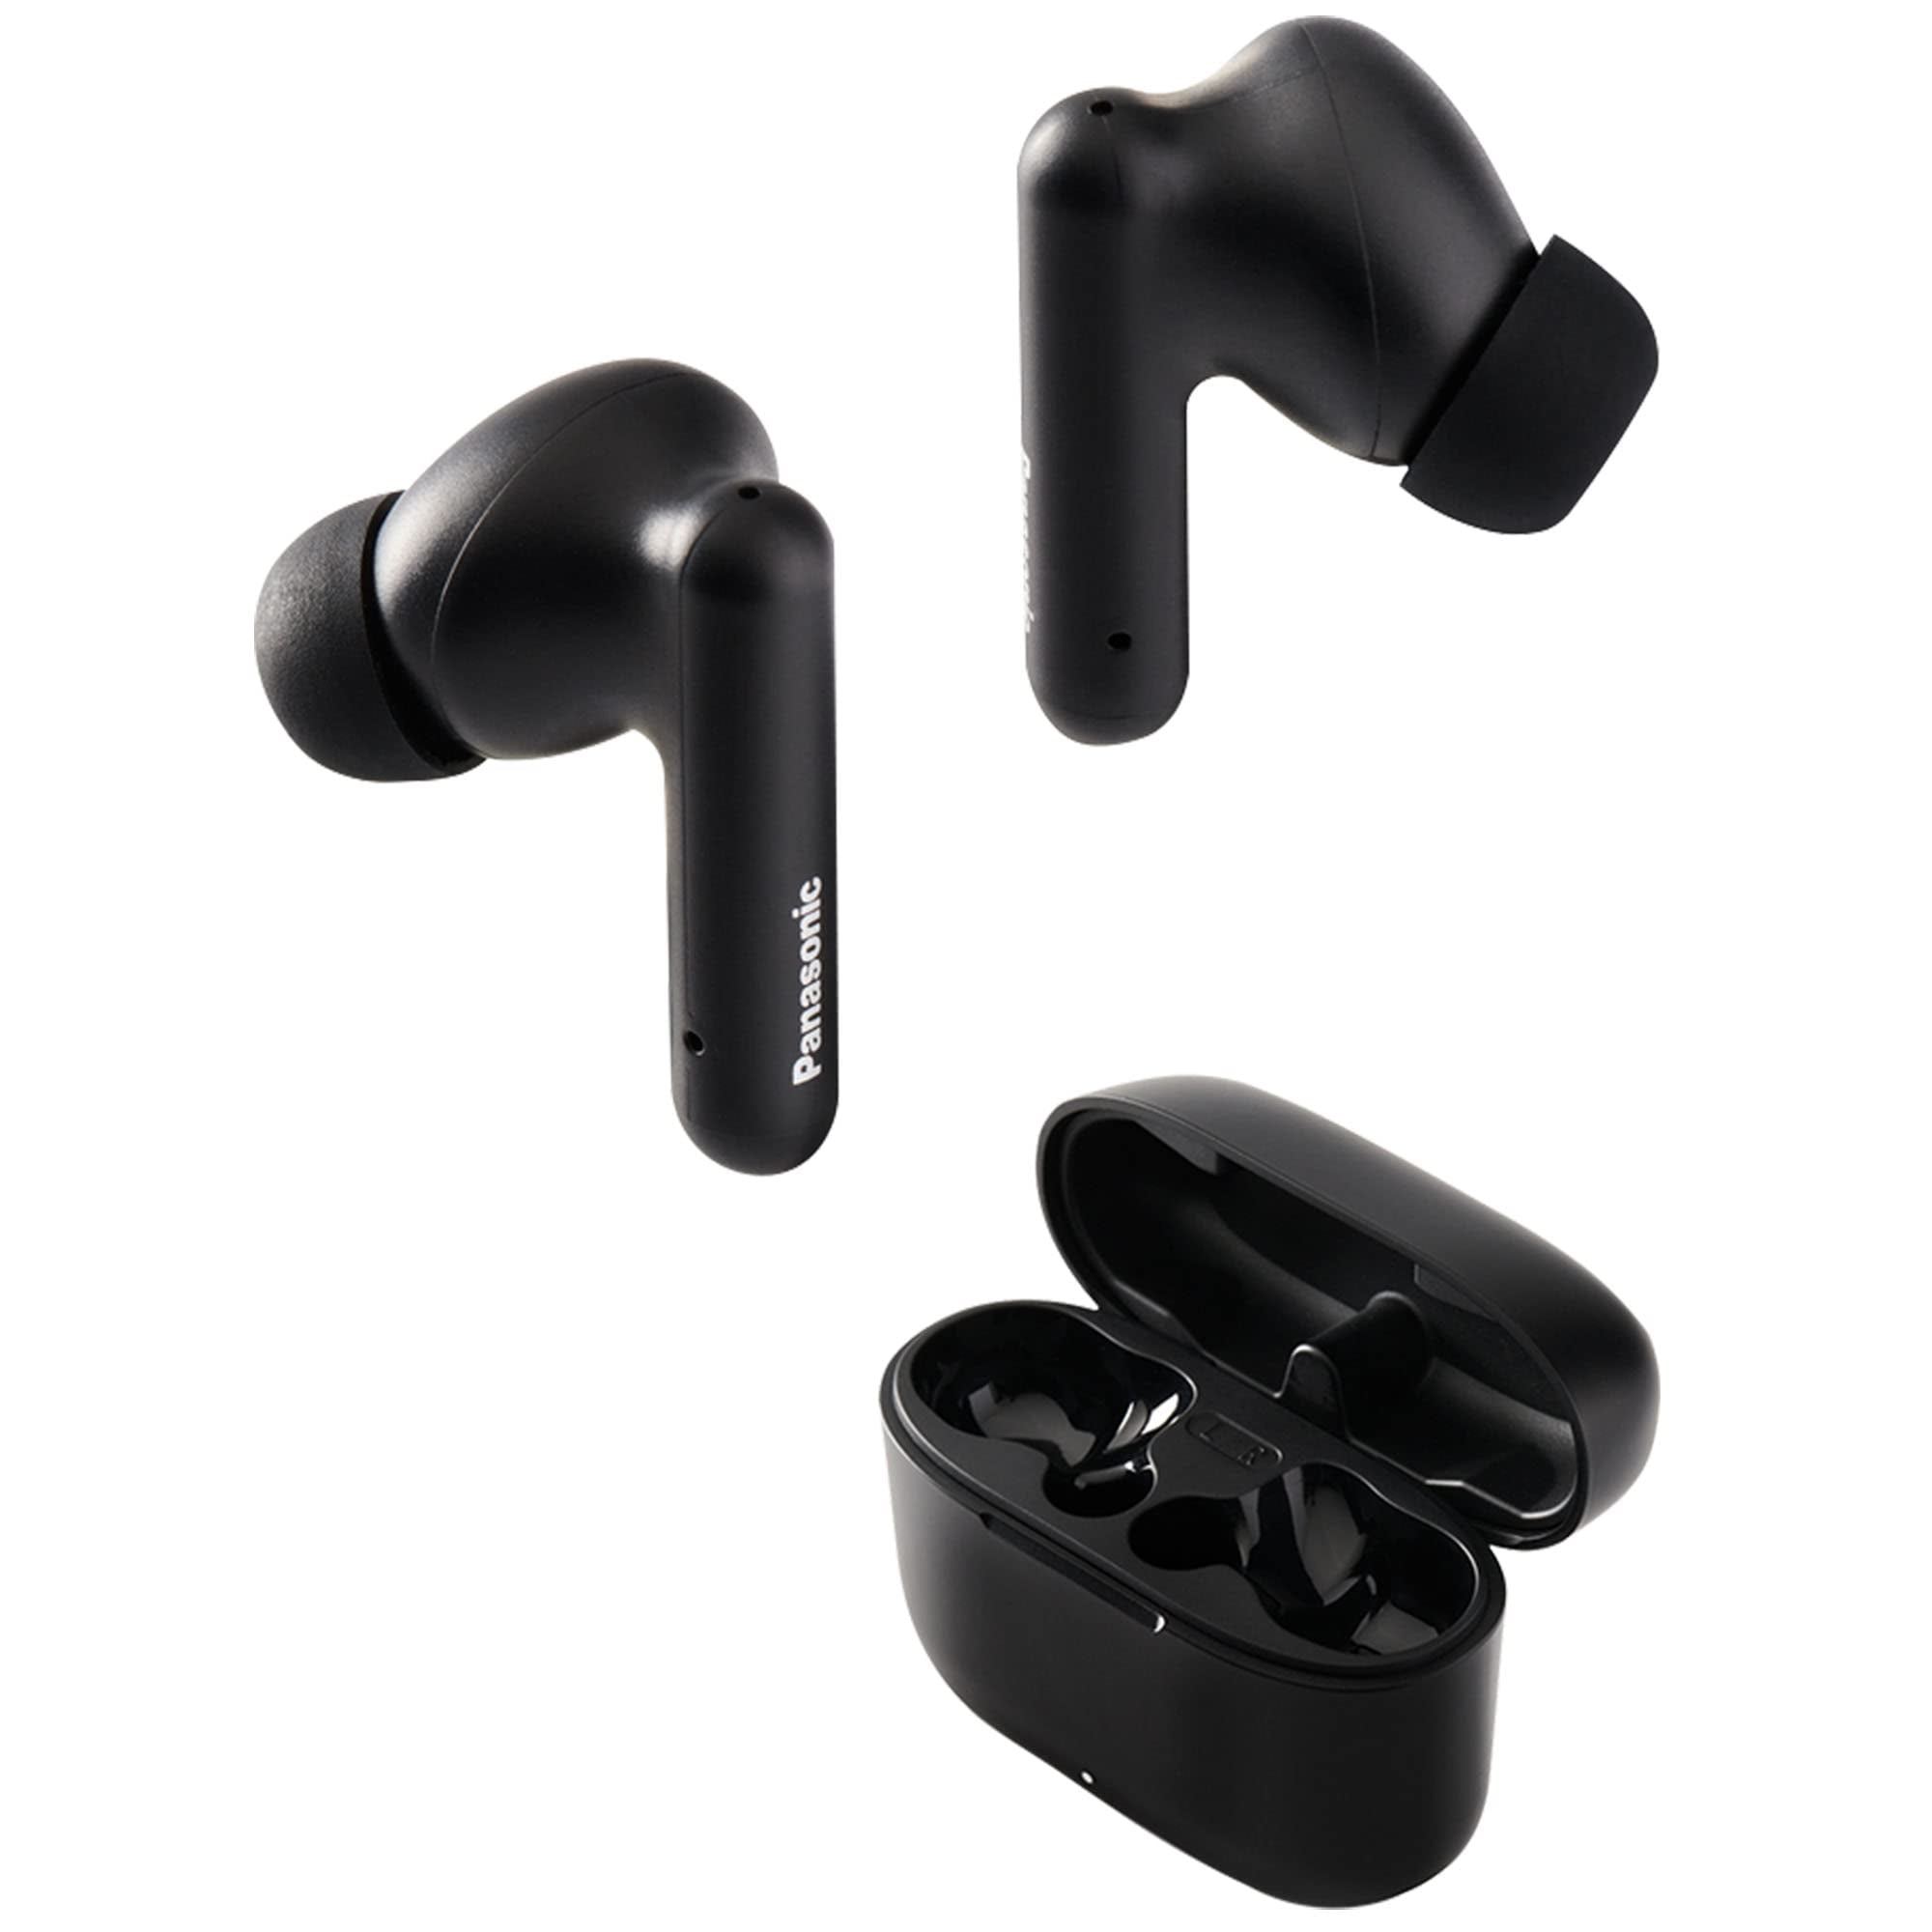 Wireless Earbuds For OnePlus 8 , with Immersive Sound True 5.0